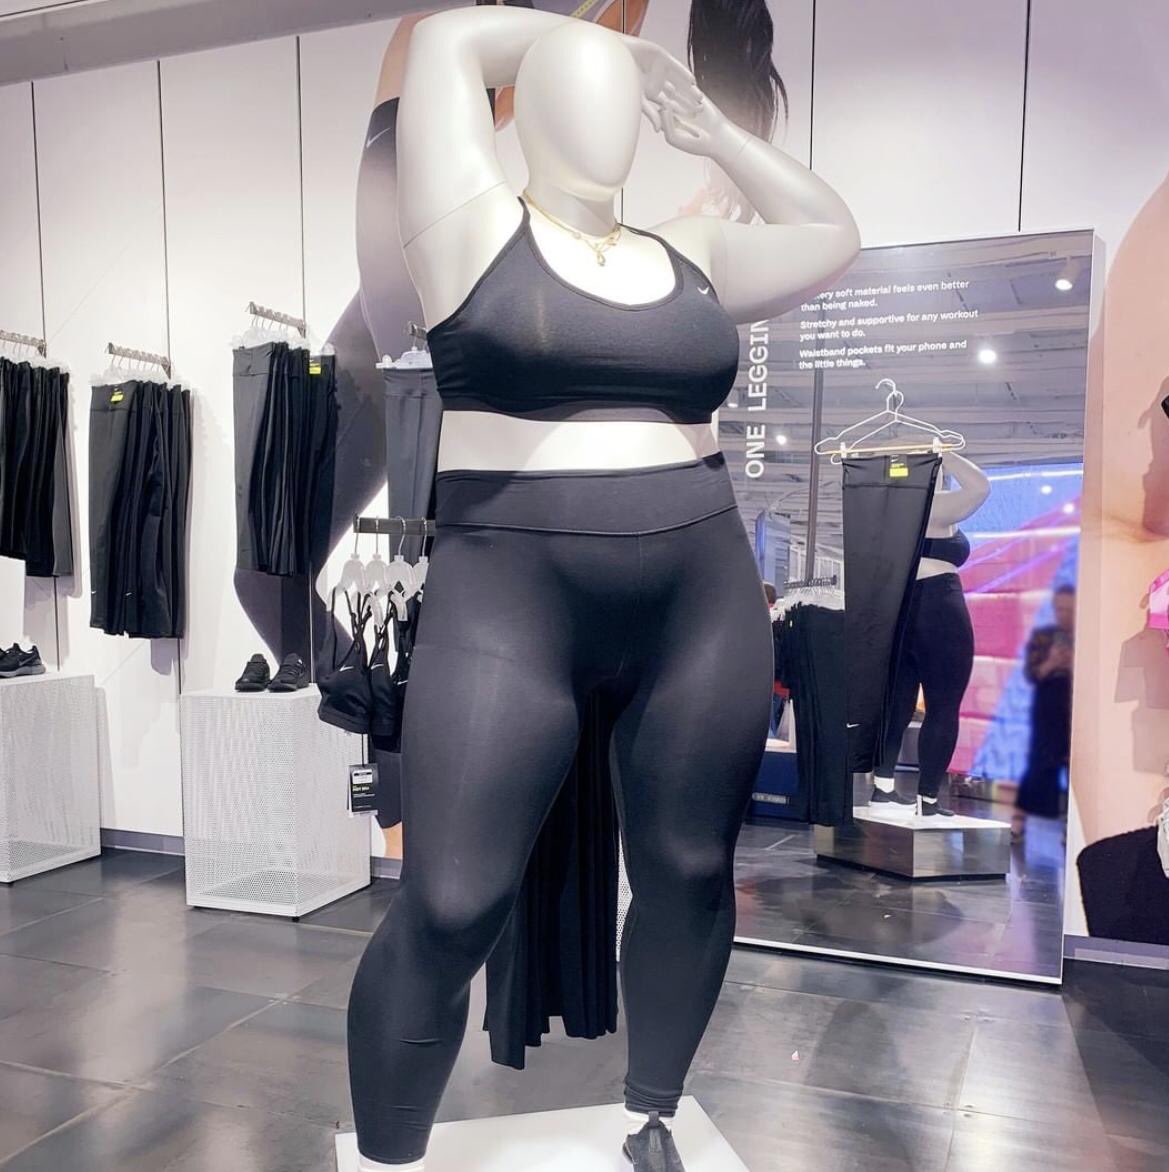 Twitter: "Really digging this plus size mannequin at @Nike reenforcing that girls can be athletes too 🙌 #effyourbeautystandards https://t.co/ei8Vss6CIX" / Twitter